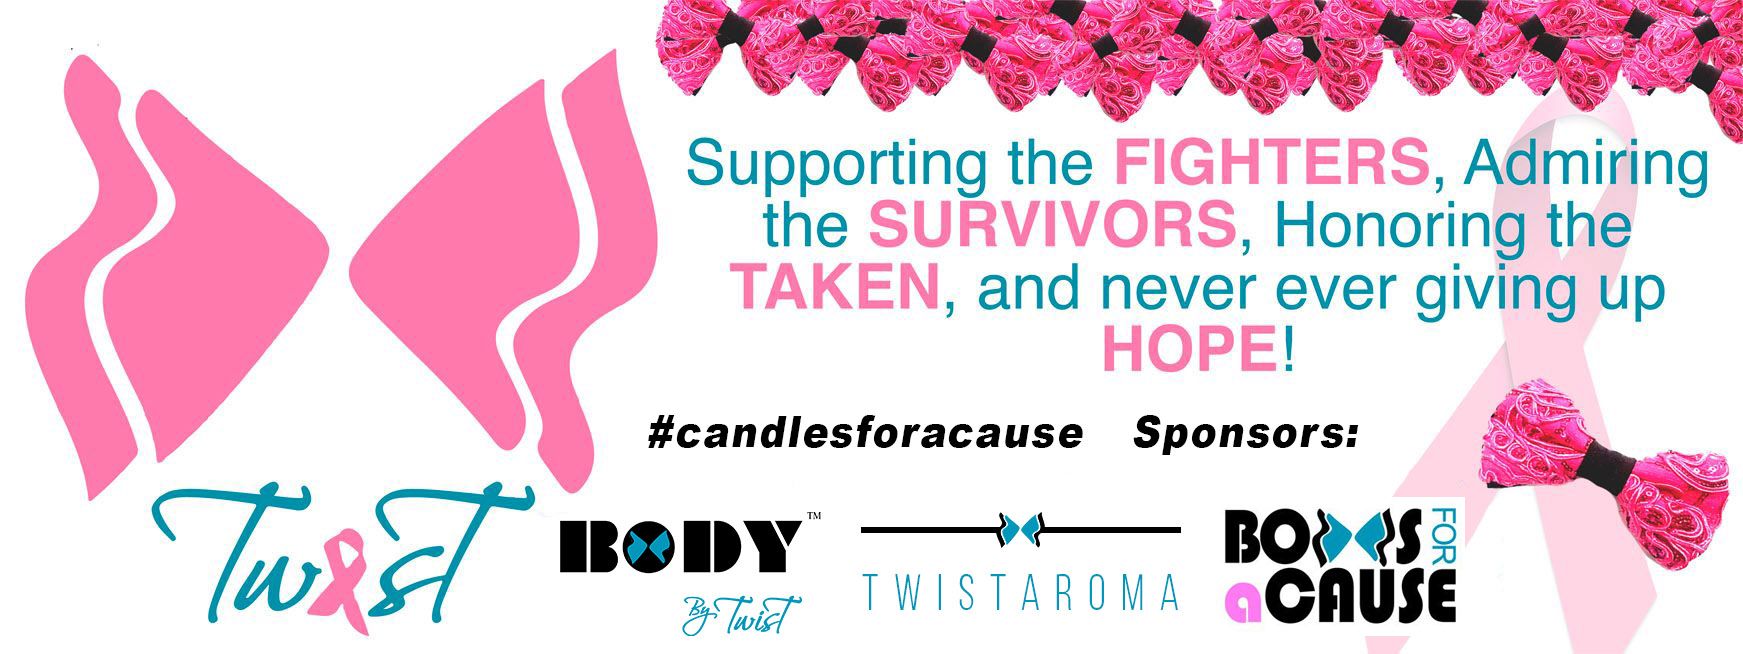 candles for a cause